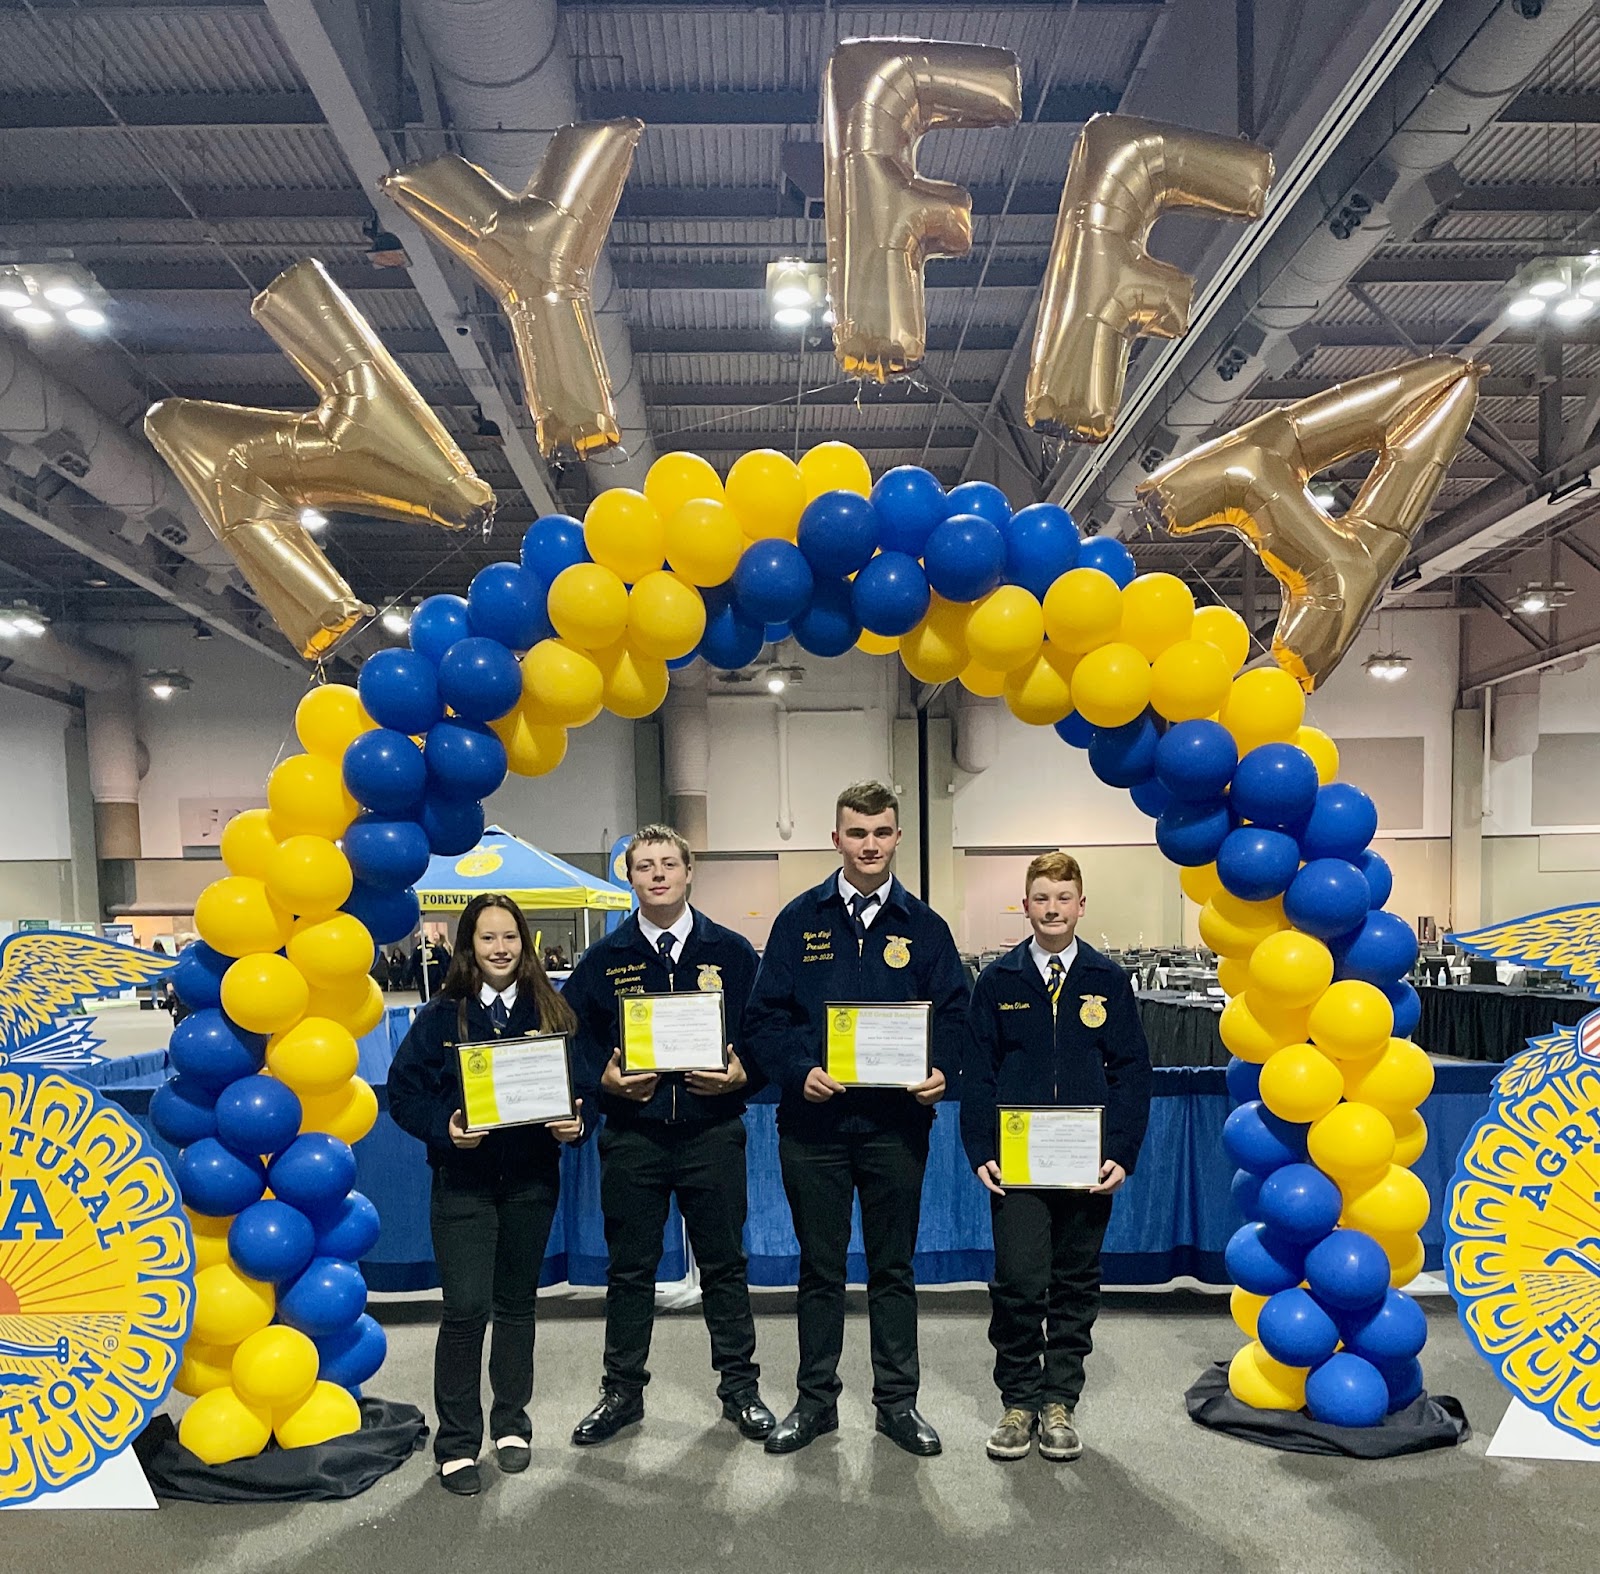 Schoharie students Celebrate 97th New York FFA Convention in Person